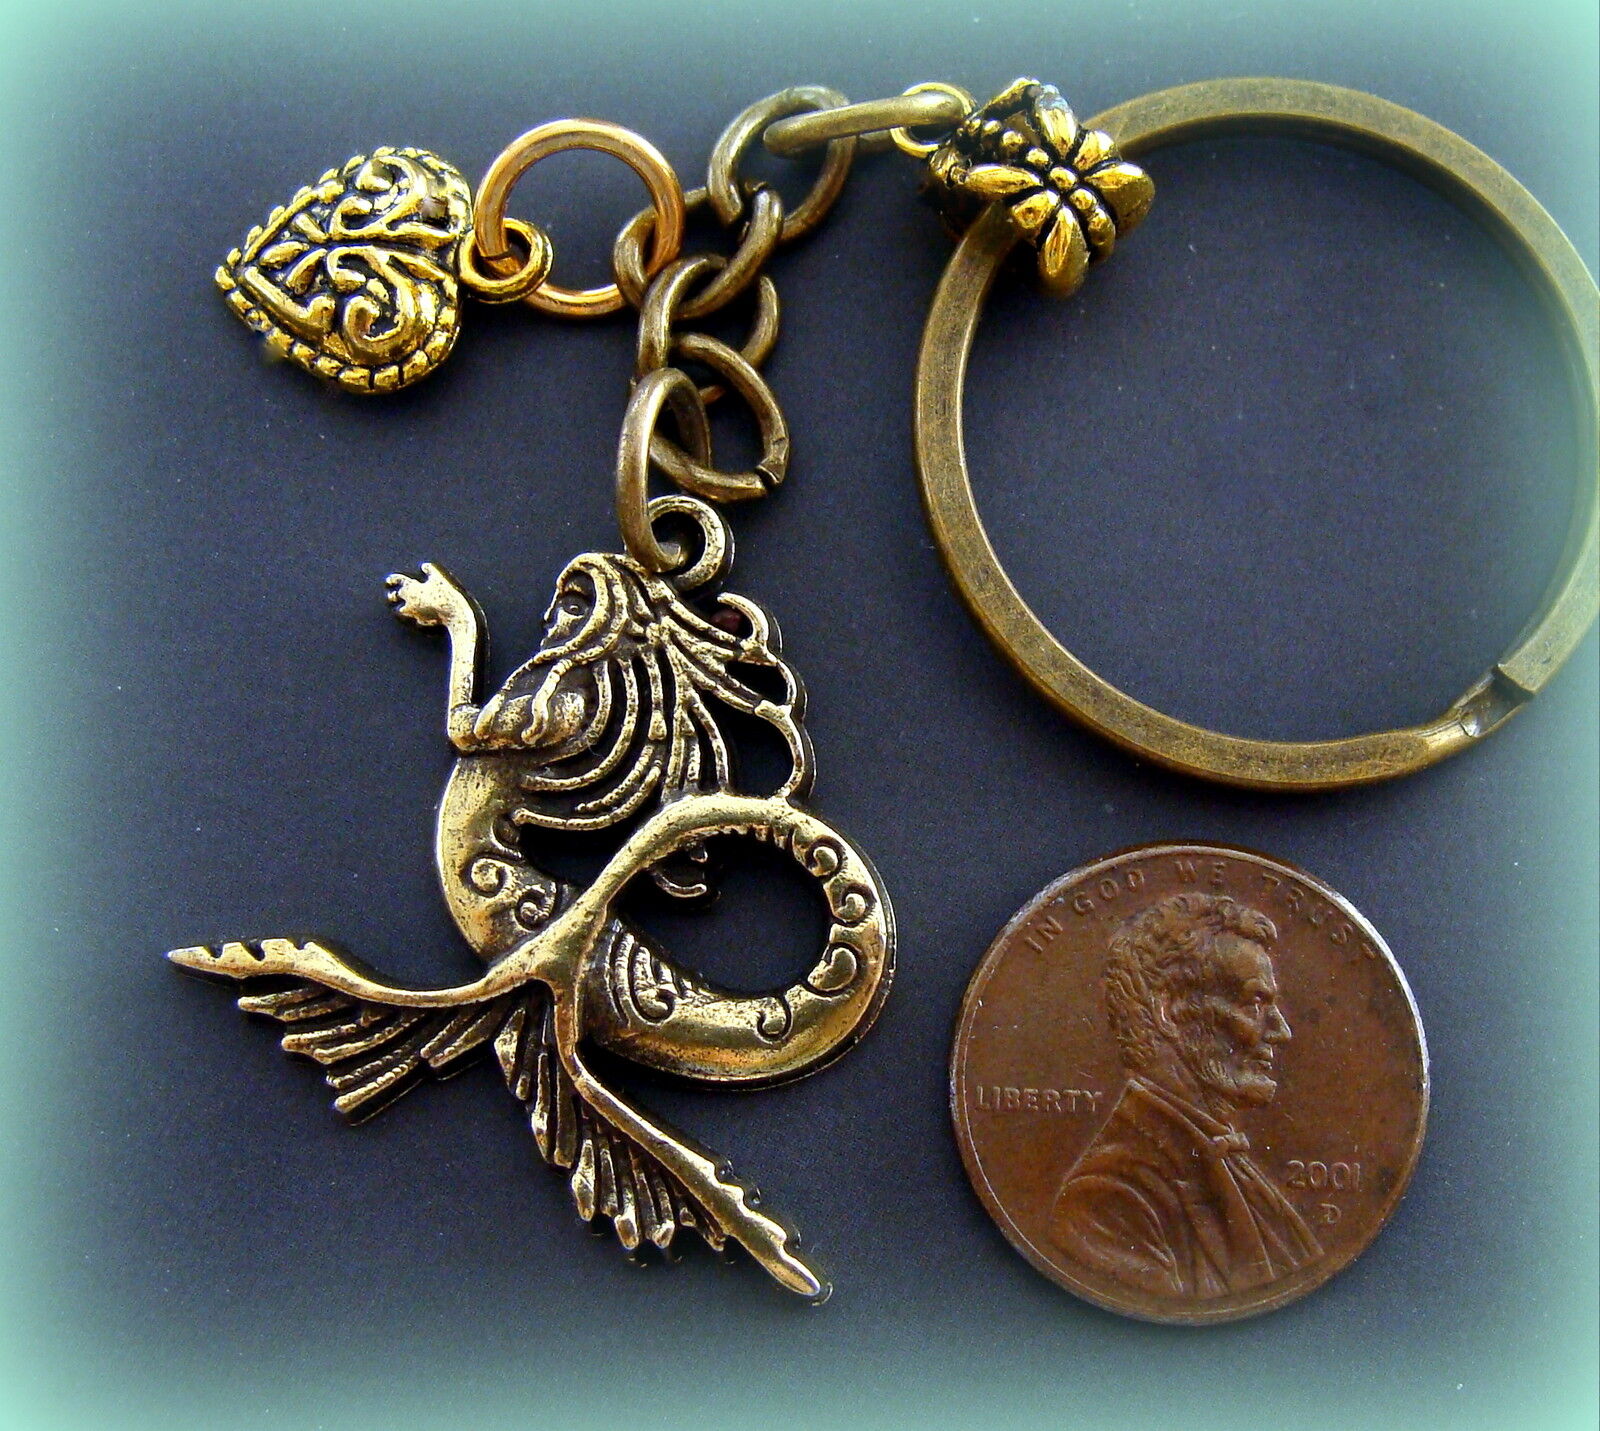 MERMAID Nude Sea Nymph Jewelry ANTIQUE Art Nouveau Victorian Style Keychain 